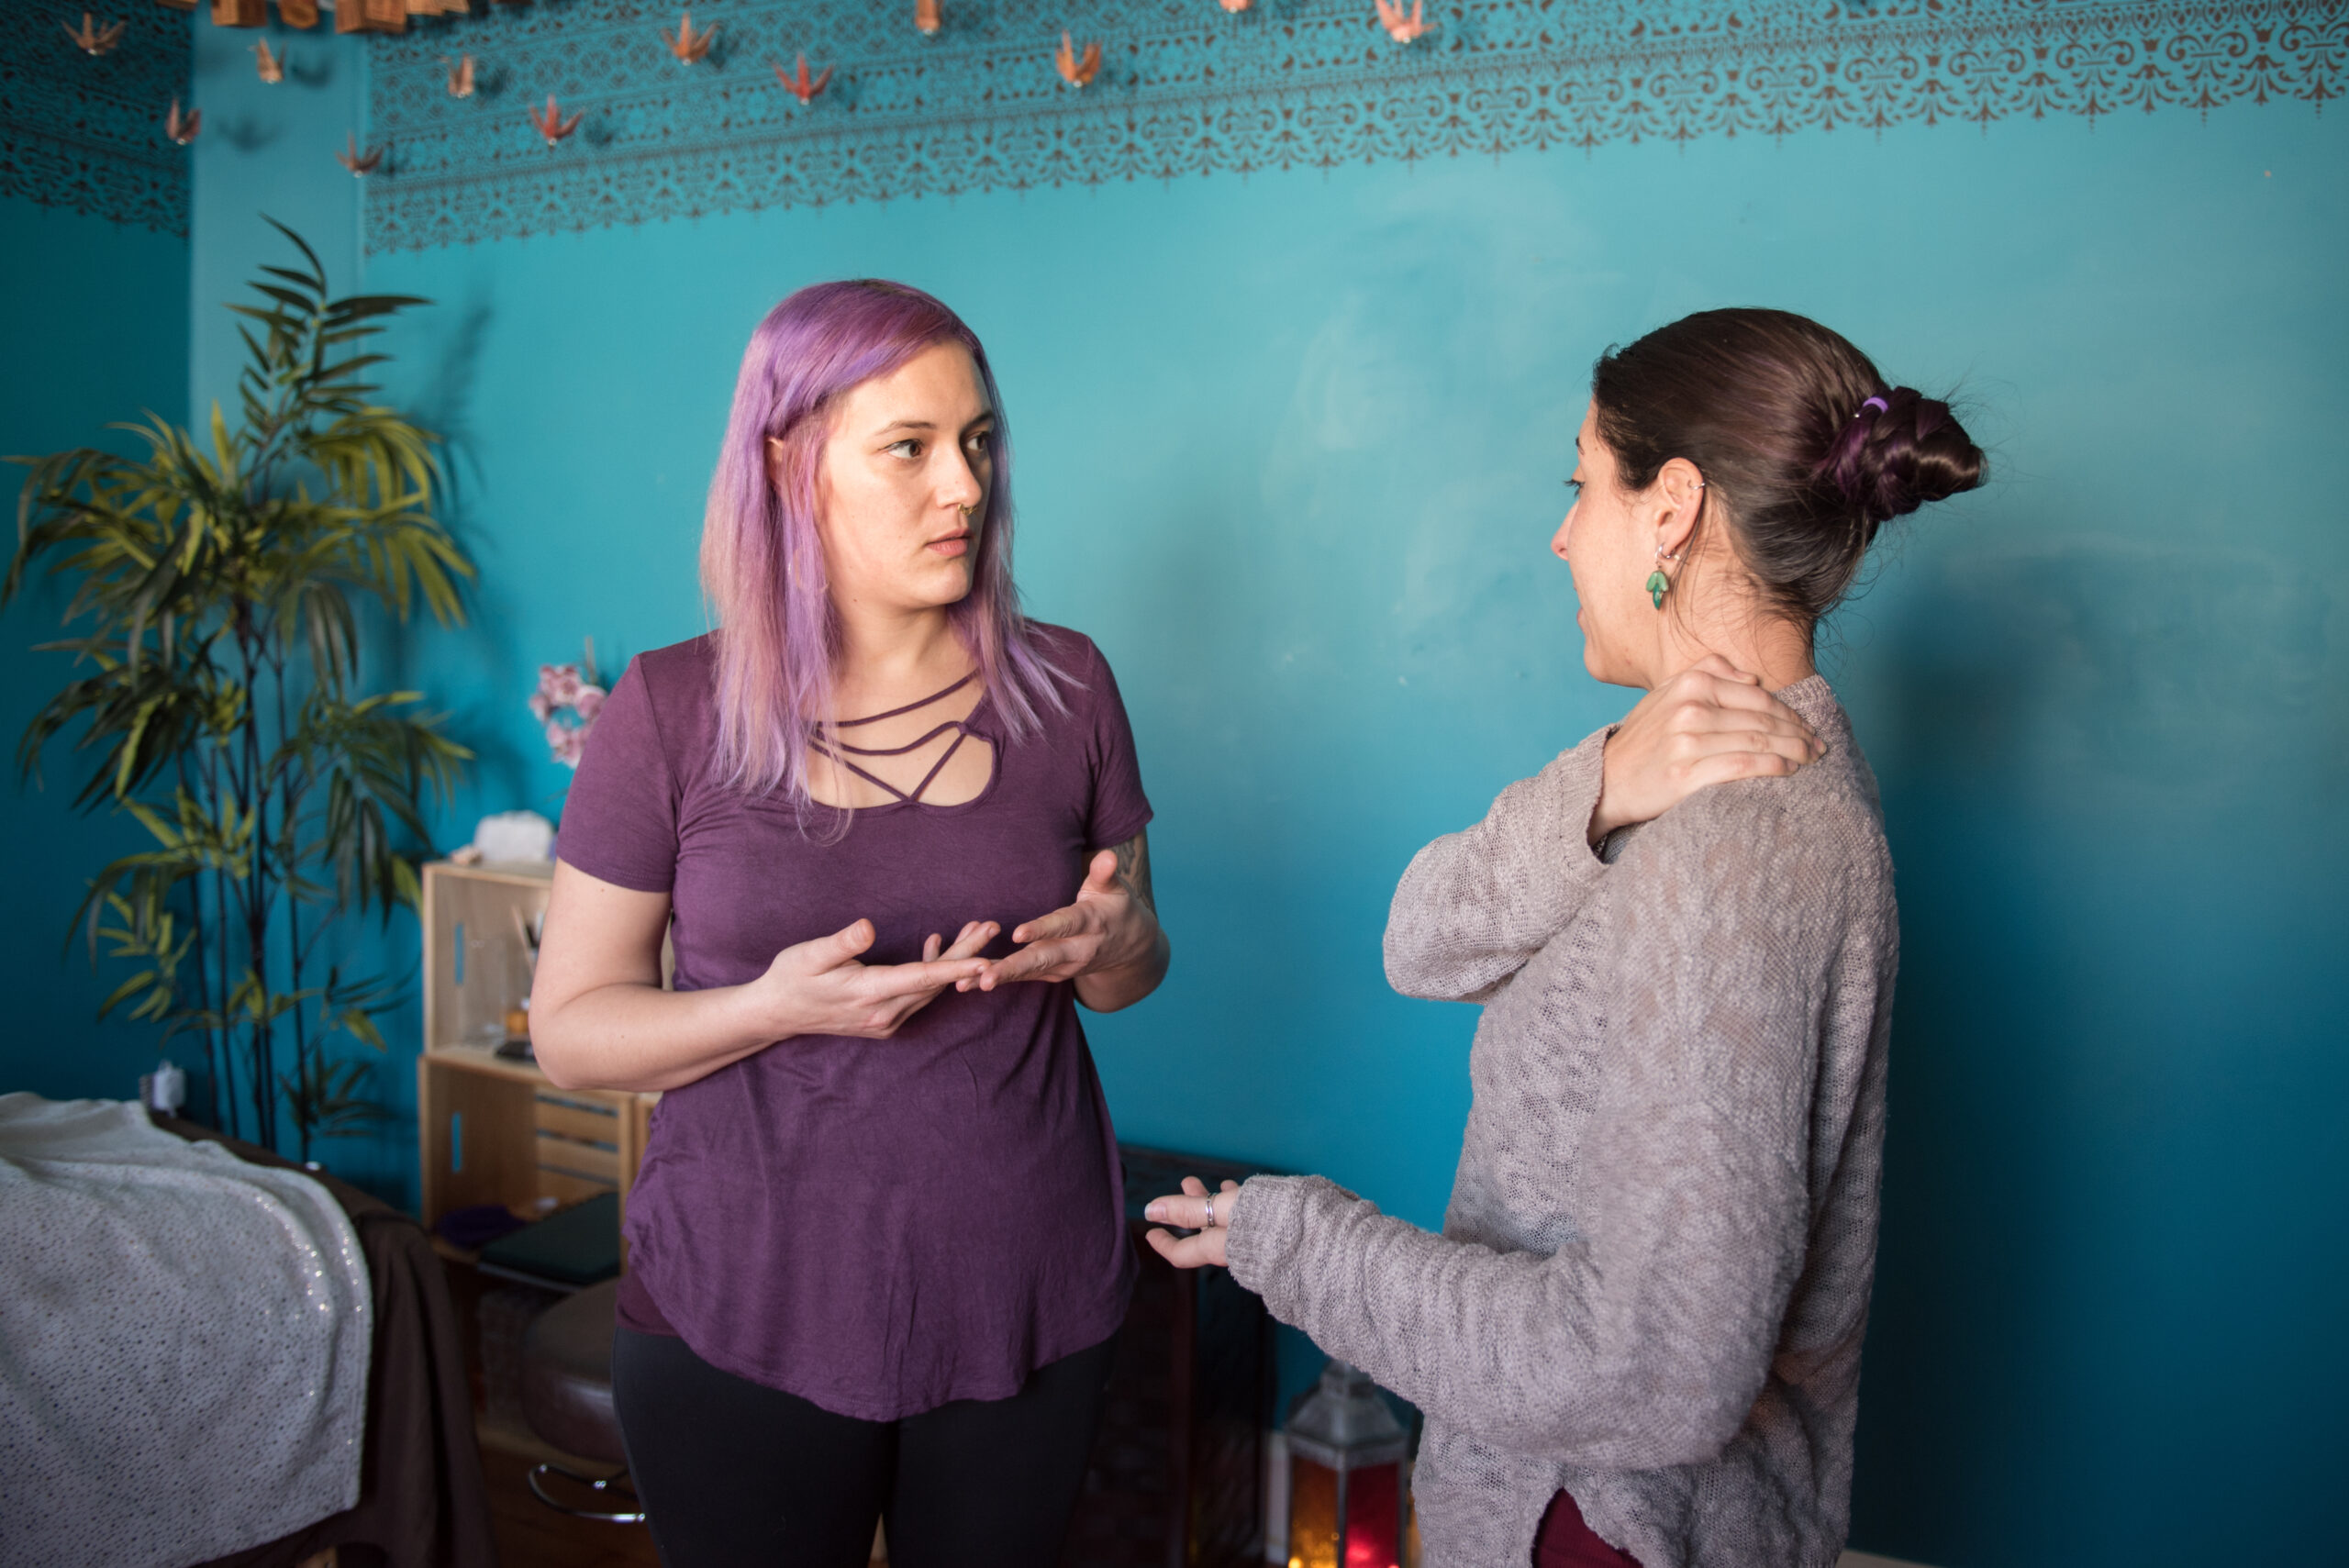 Two individuals in conversation, one with purple hair in a mauve top gesturing with hands, the other in a gray sweater holding their shoulder, in a room with a turquoise wall and a decorative border.